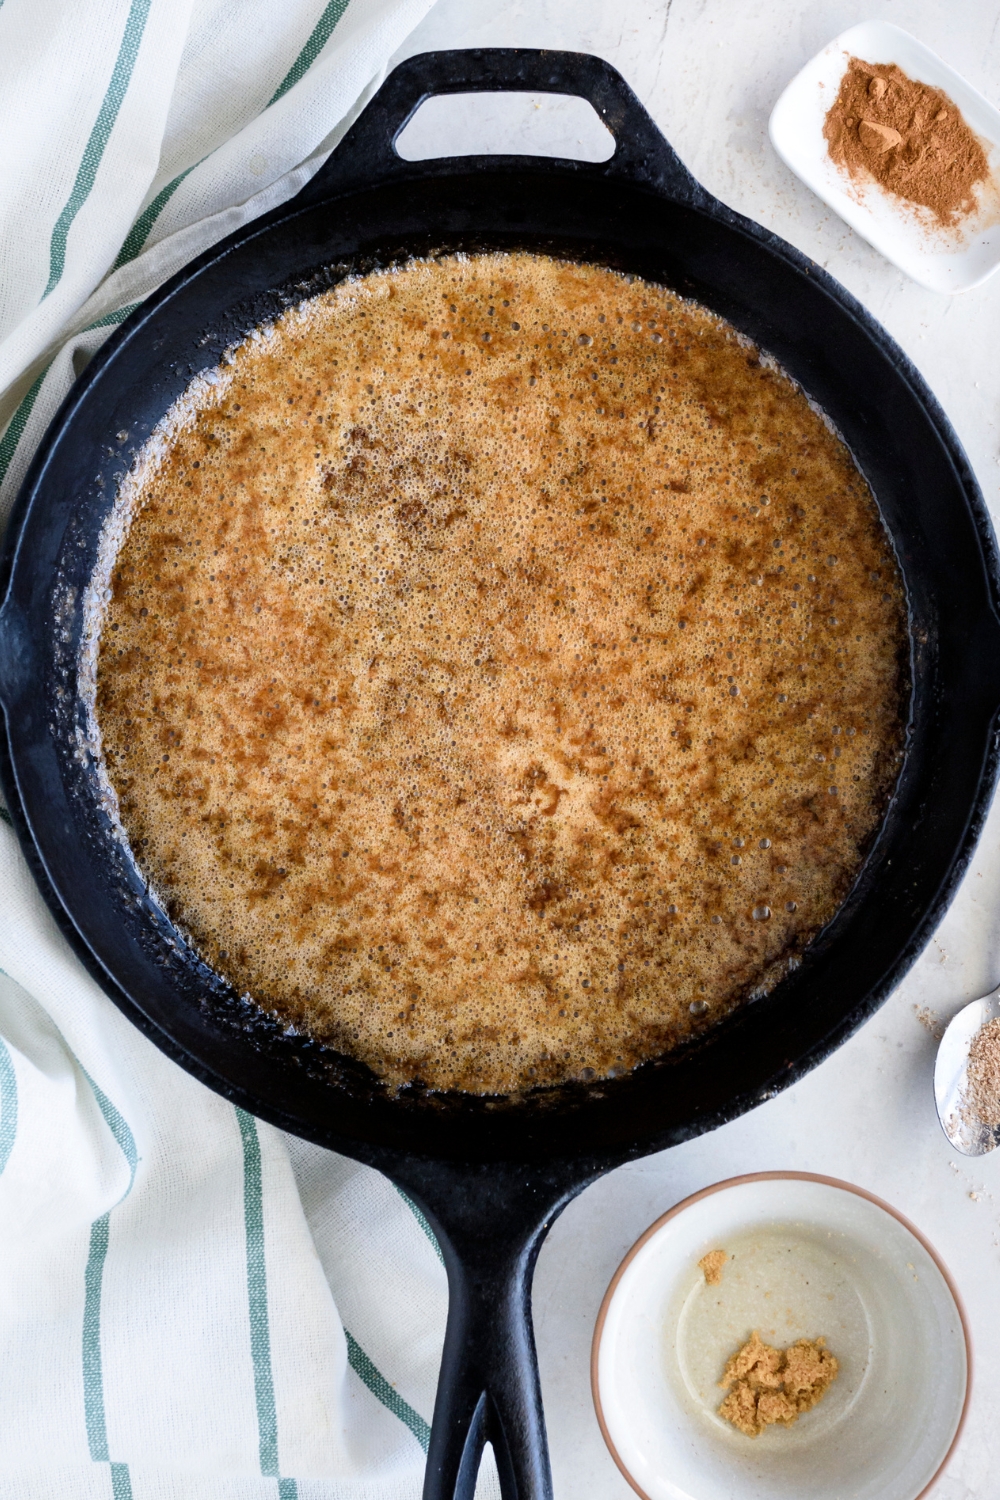 A cast iron skillet with melted butter, sugar, and spice sauce.